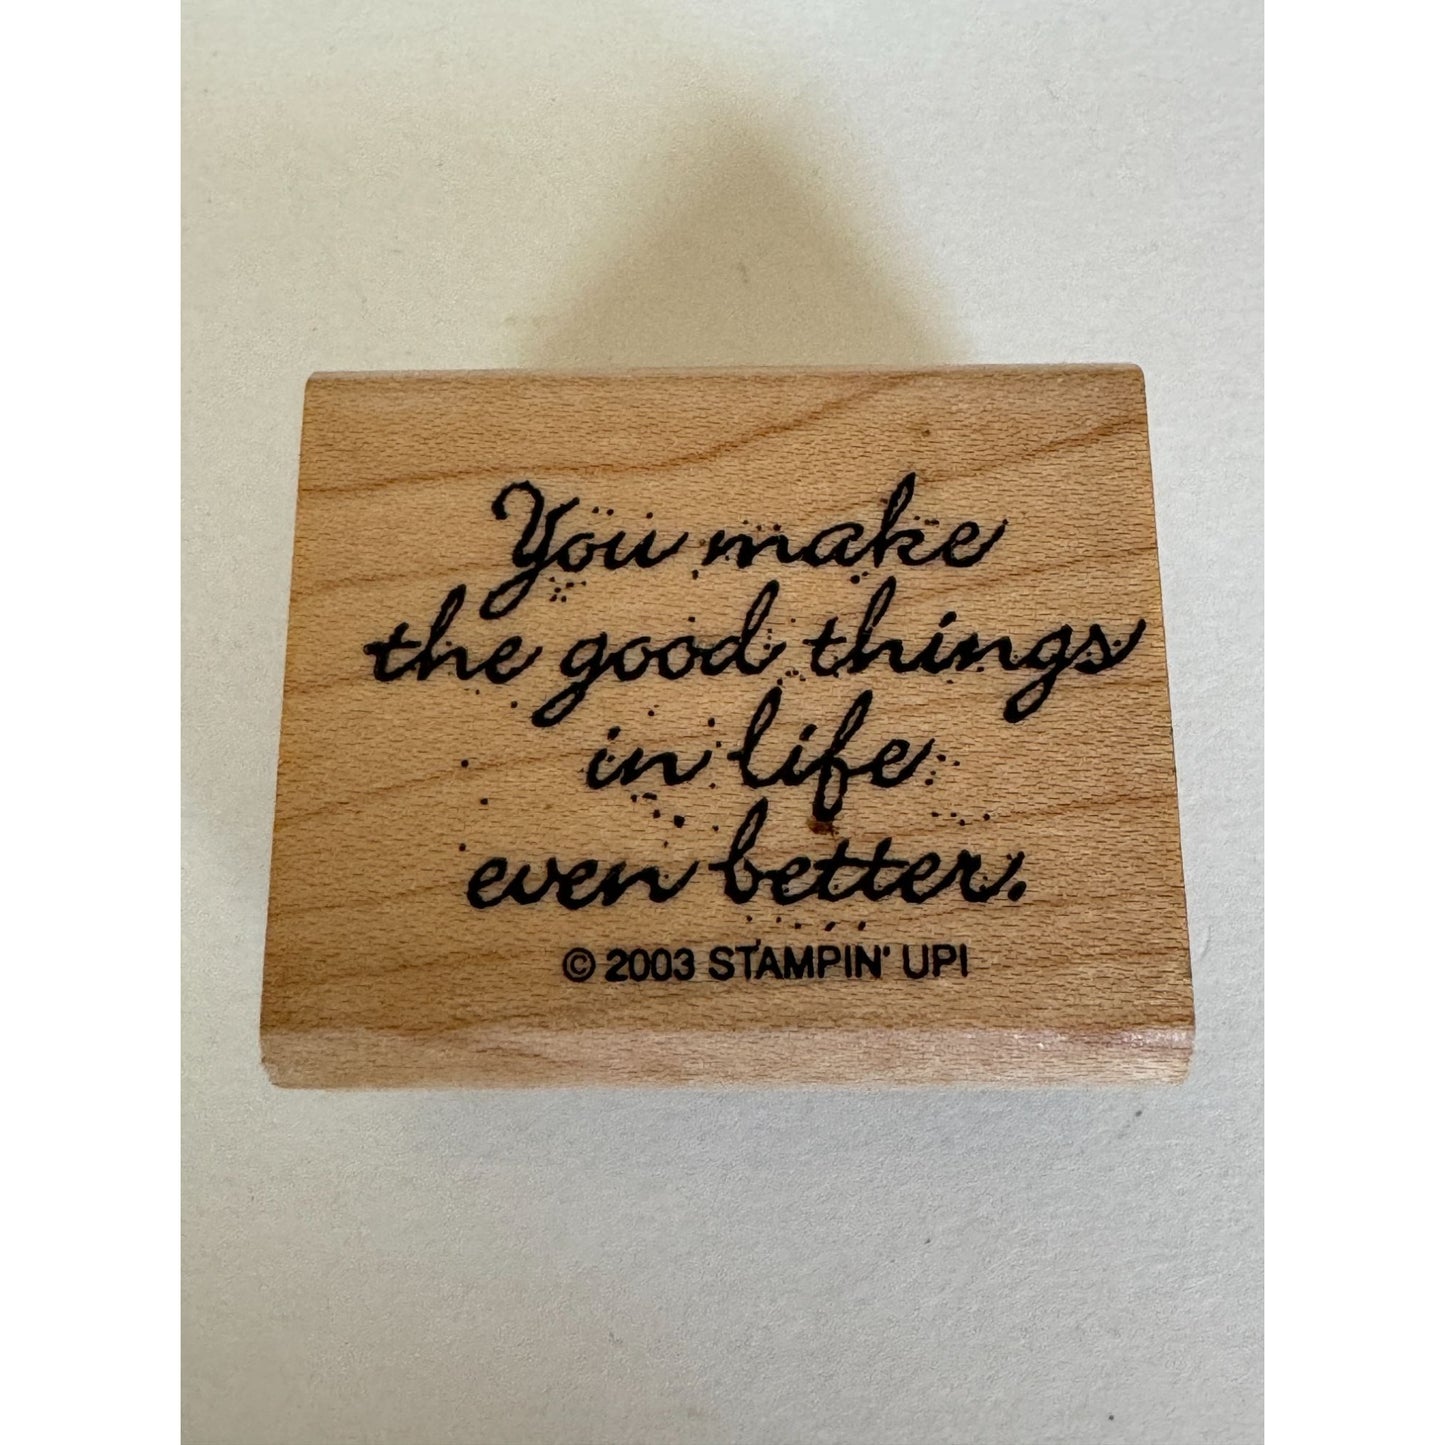 Stampin Up Rubber Stamp You Make Good Things Even Better Words Card Sentiment